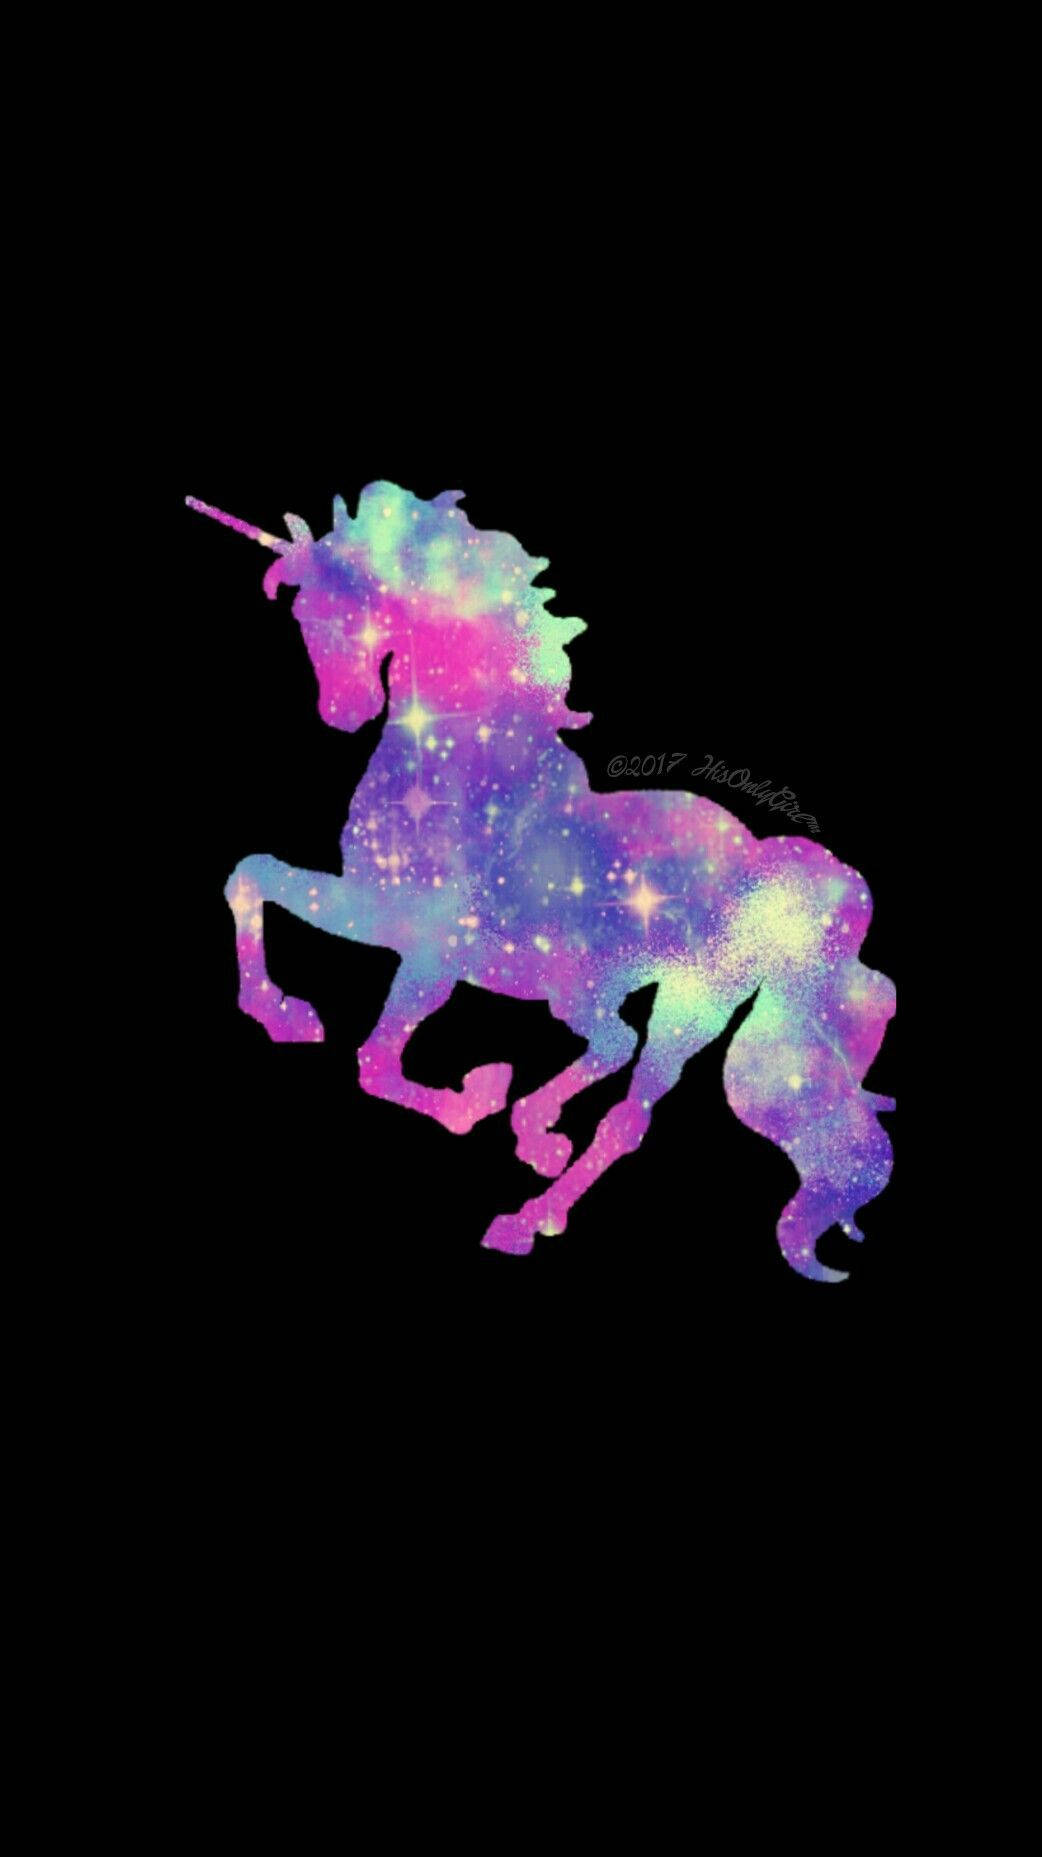 Download Cool Floating Illustration Galaxy Unicorn Wallpaper | Wallpapers .com